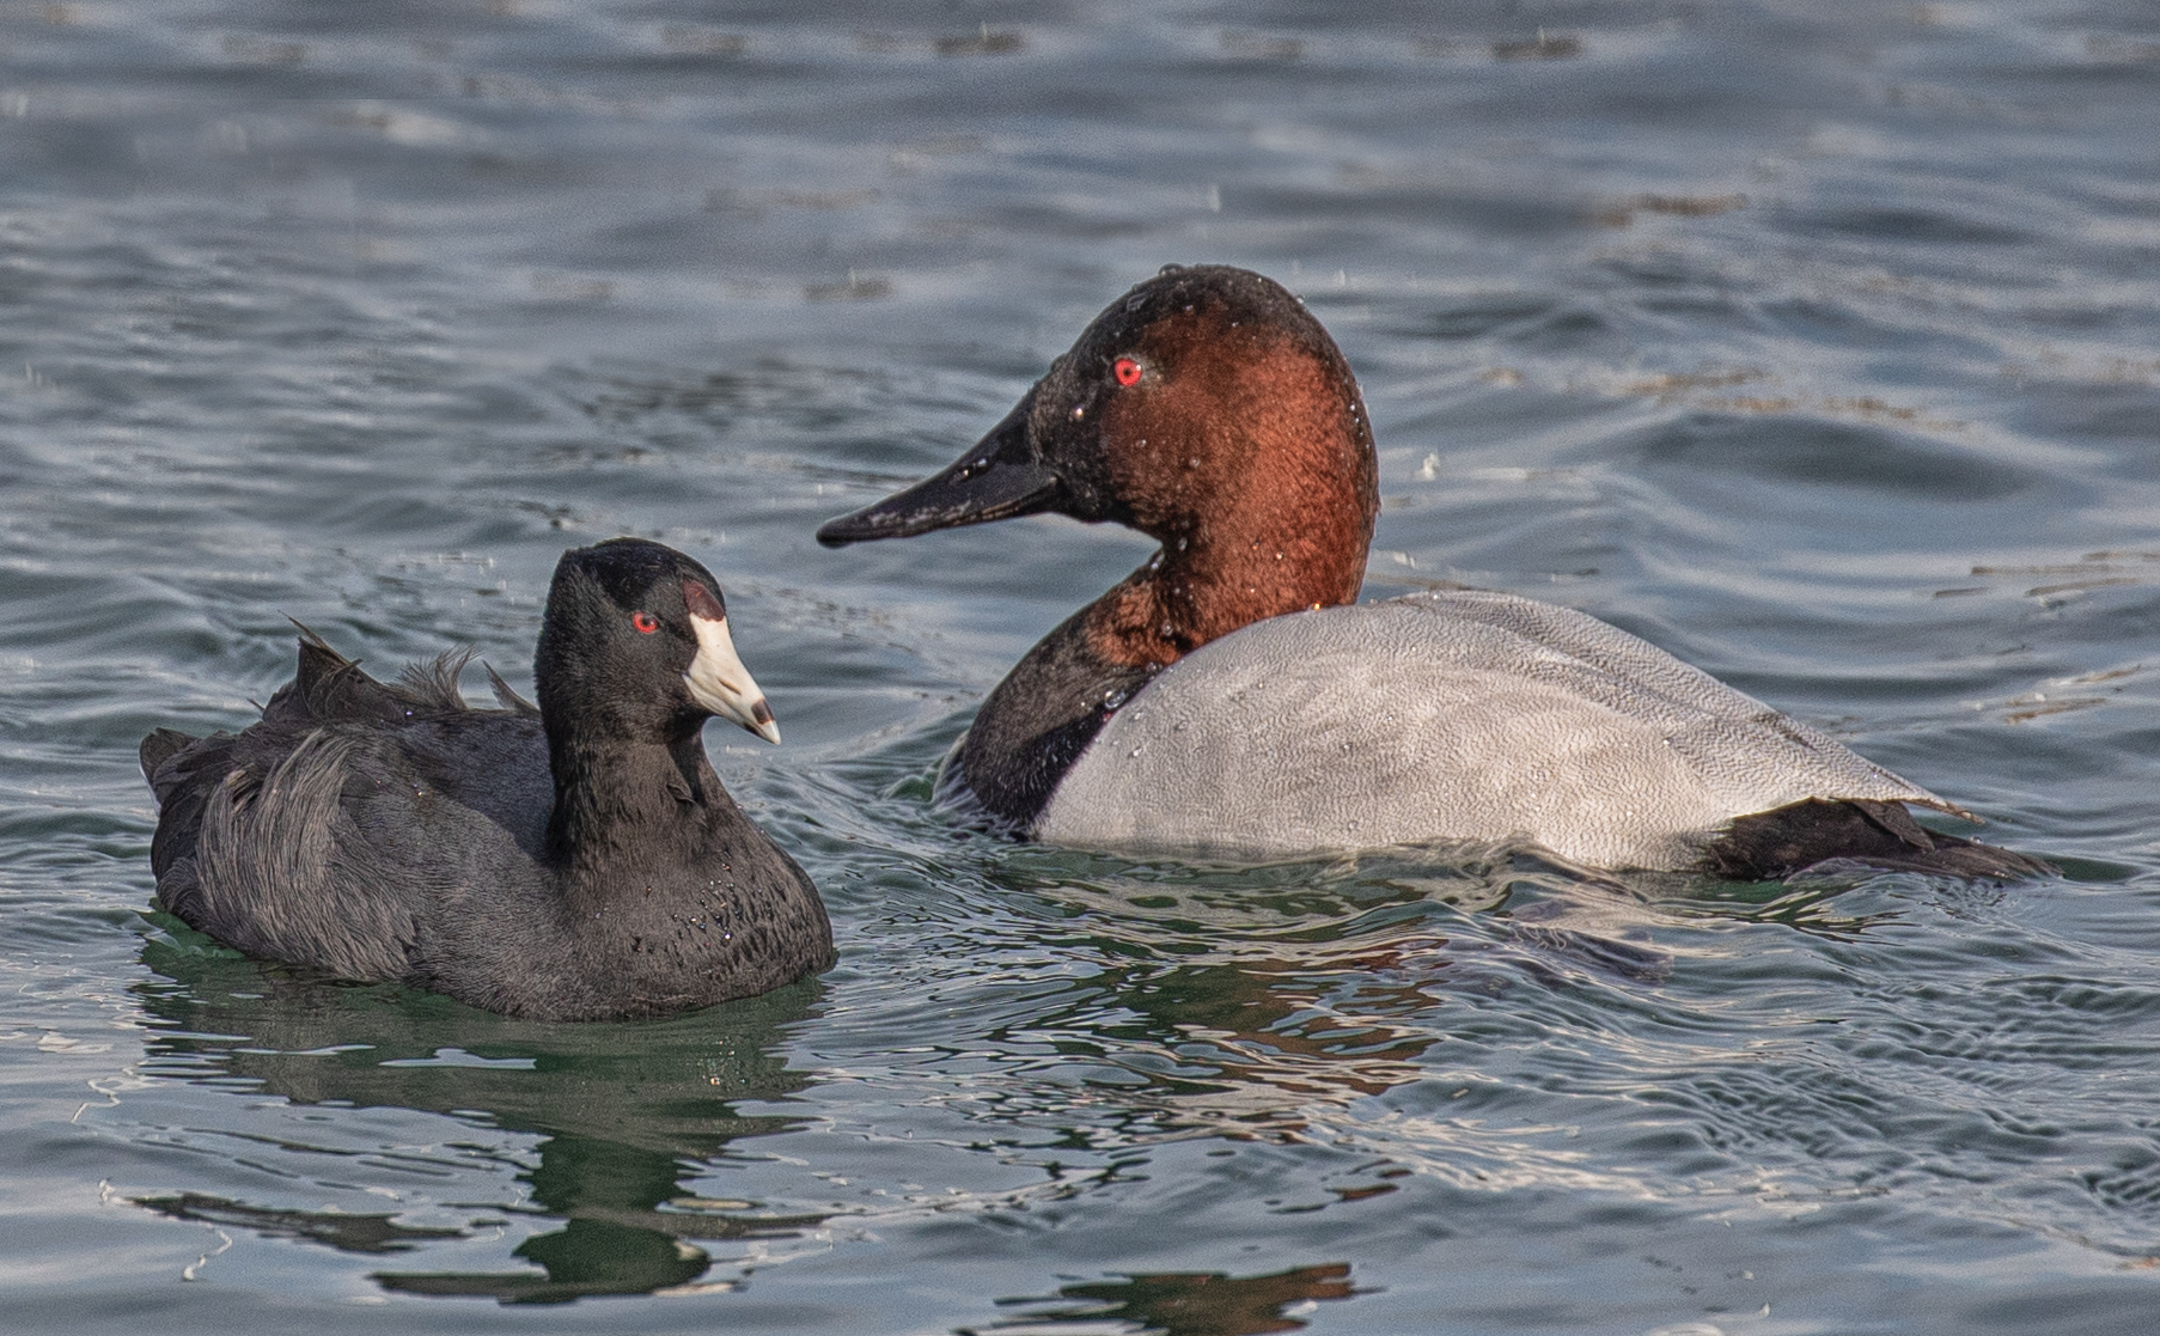 American Coot meets the Canvasback Duck....